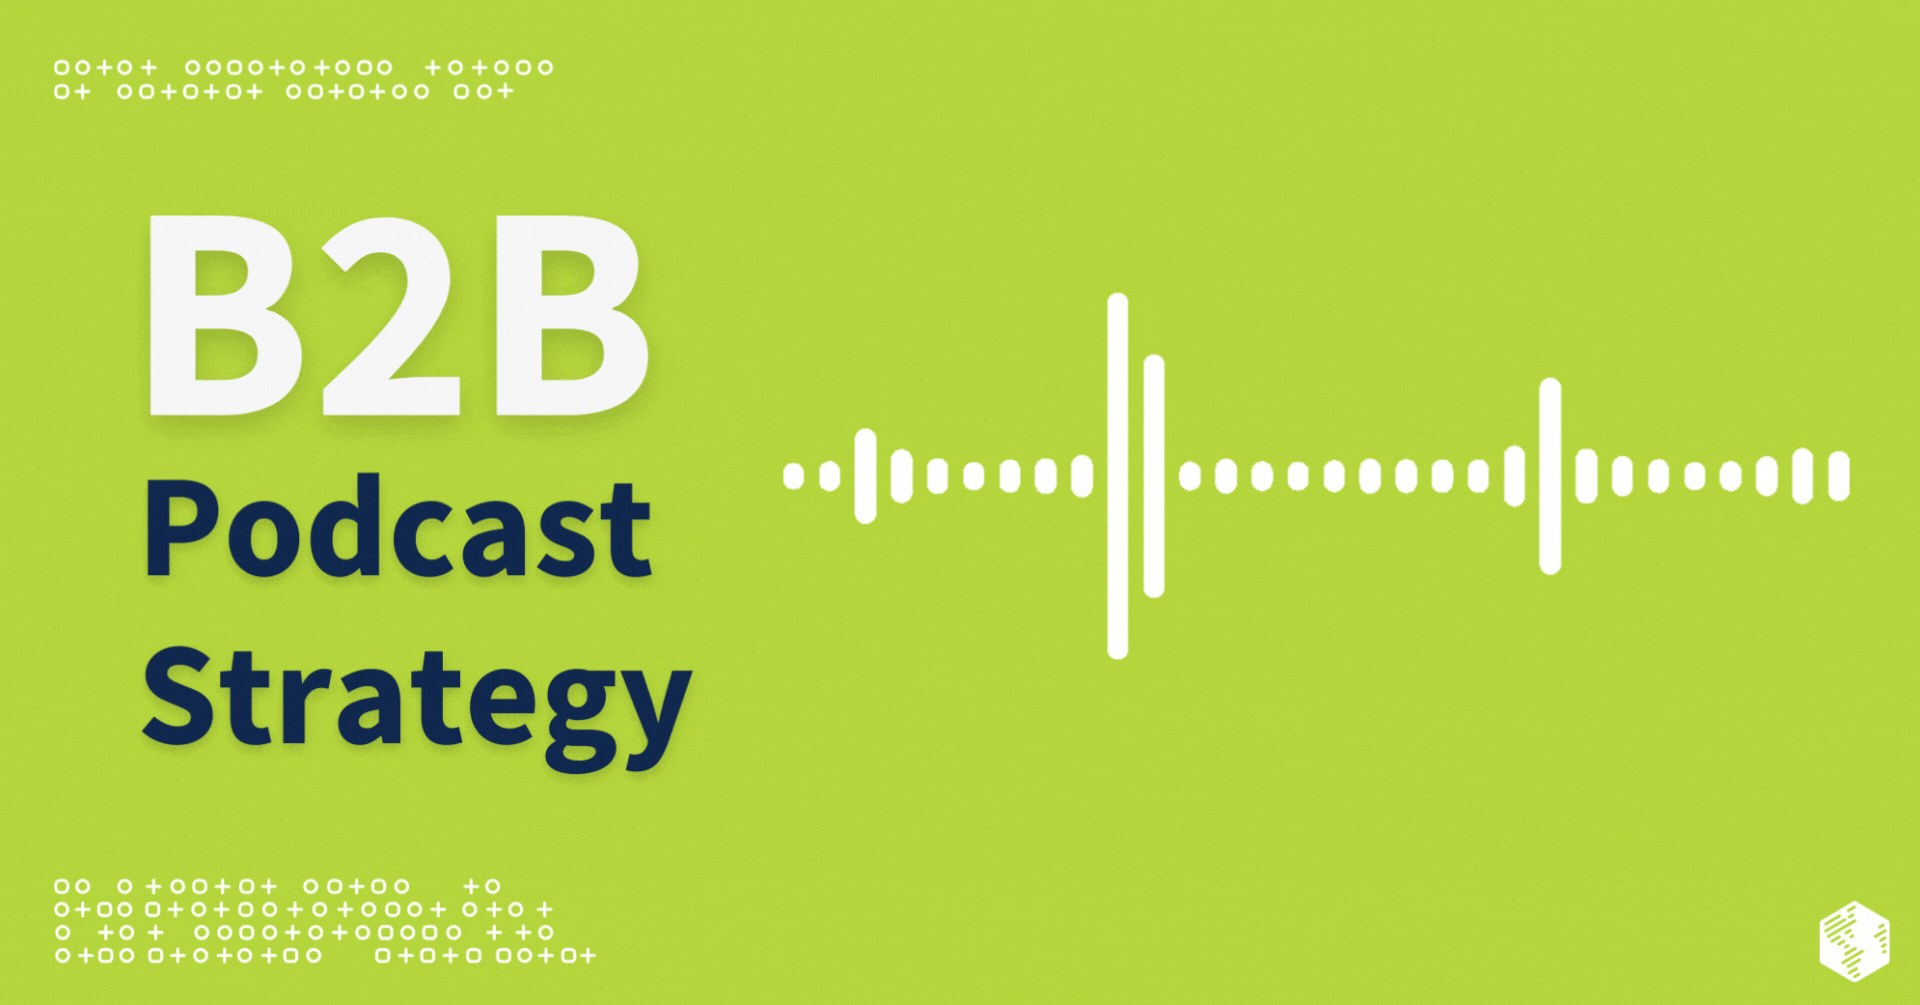 B2B Podcast Strategy: An Ultimate Guide